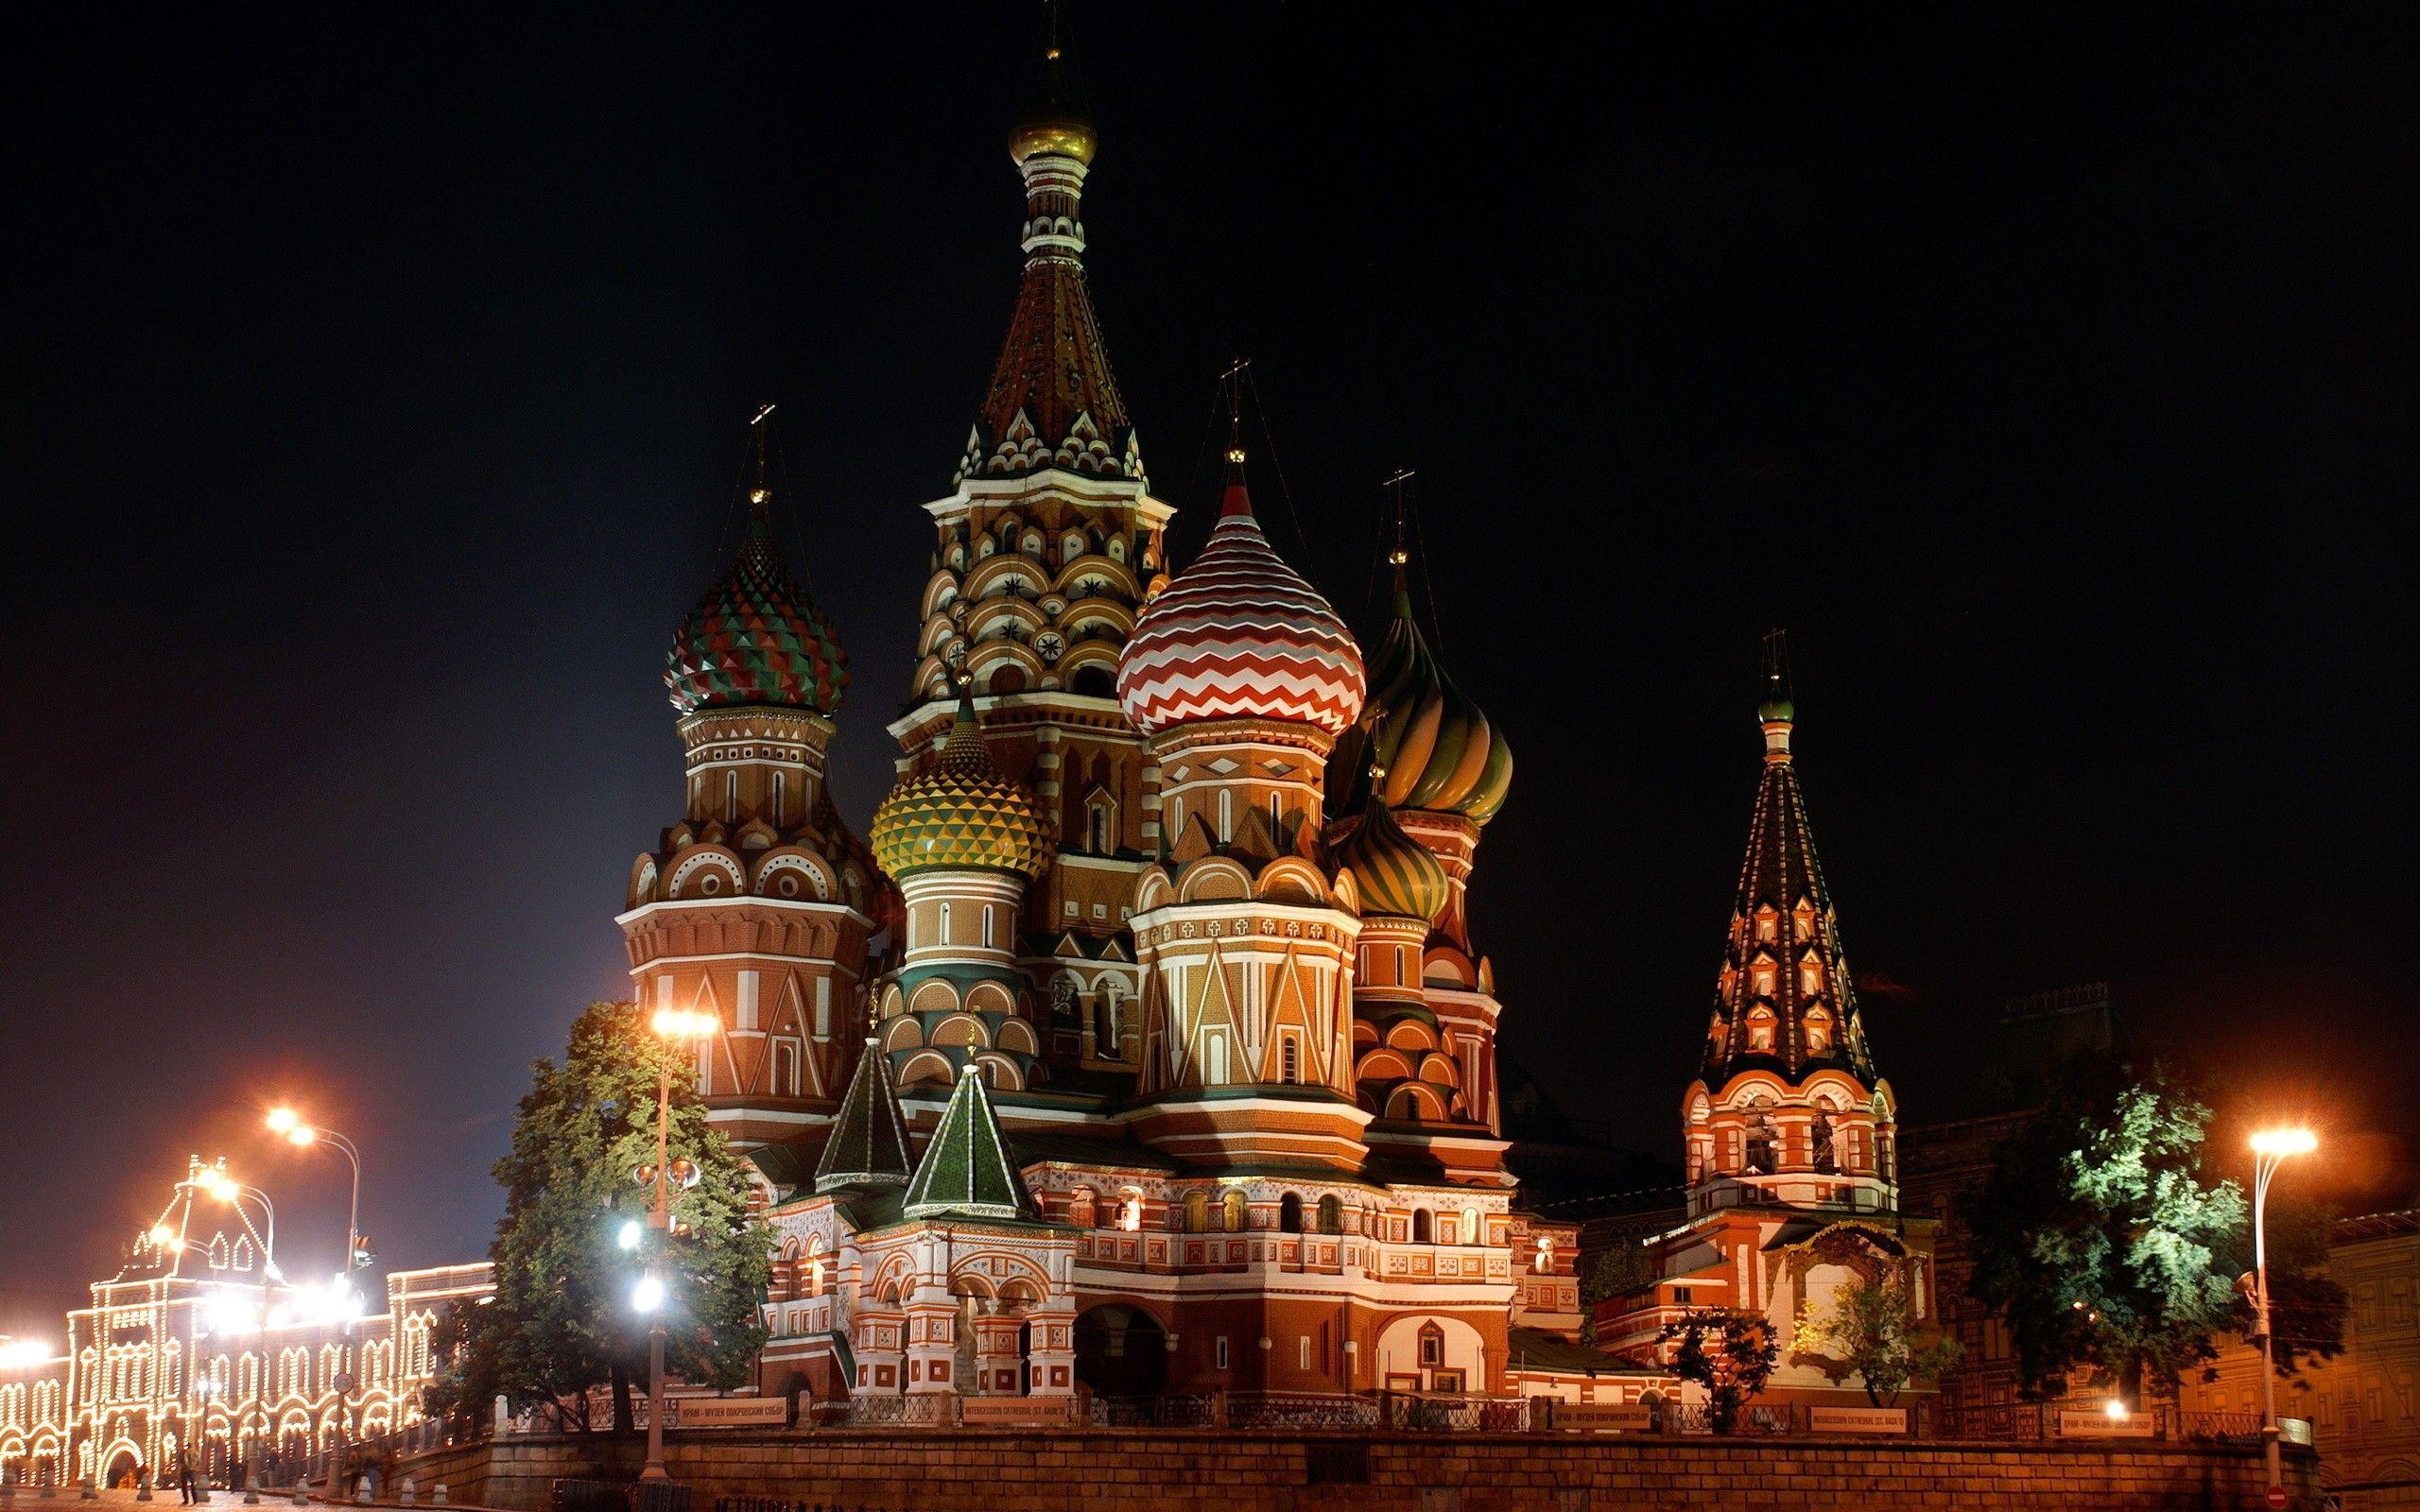 The Kremlin in Moscow wallpaper and image, picture